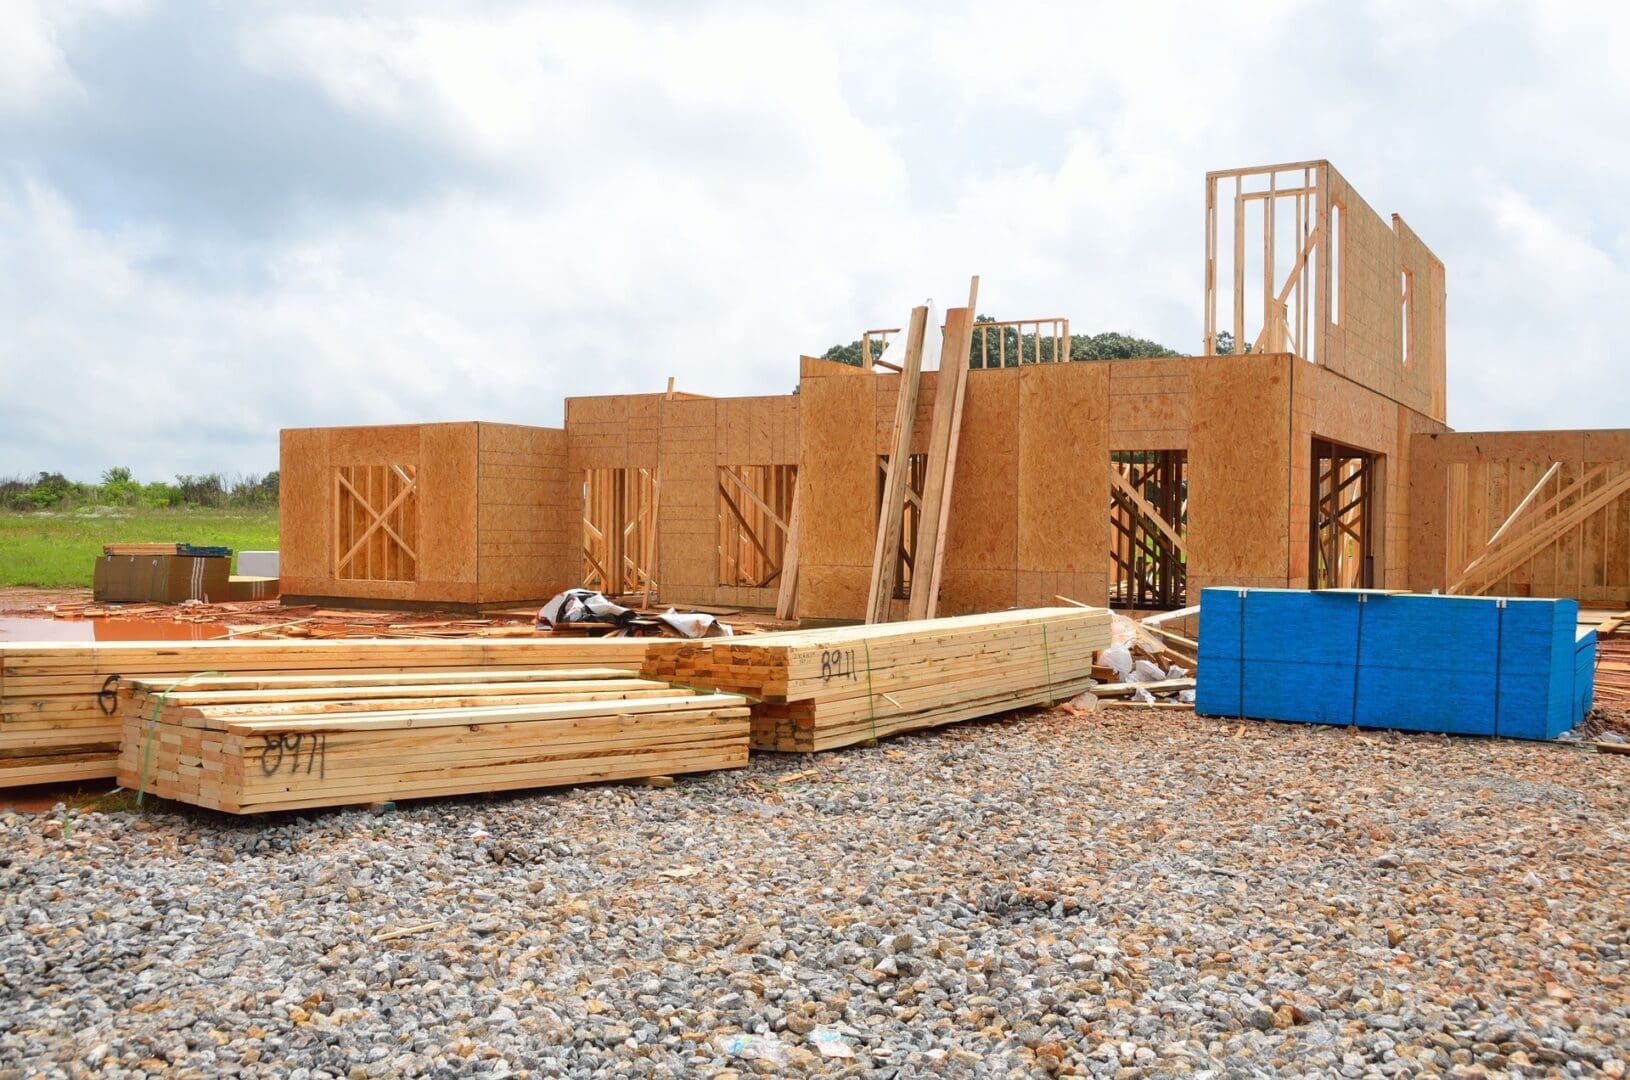 A building under construction with some wood and blue boxes.